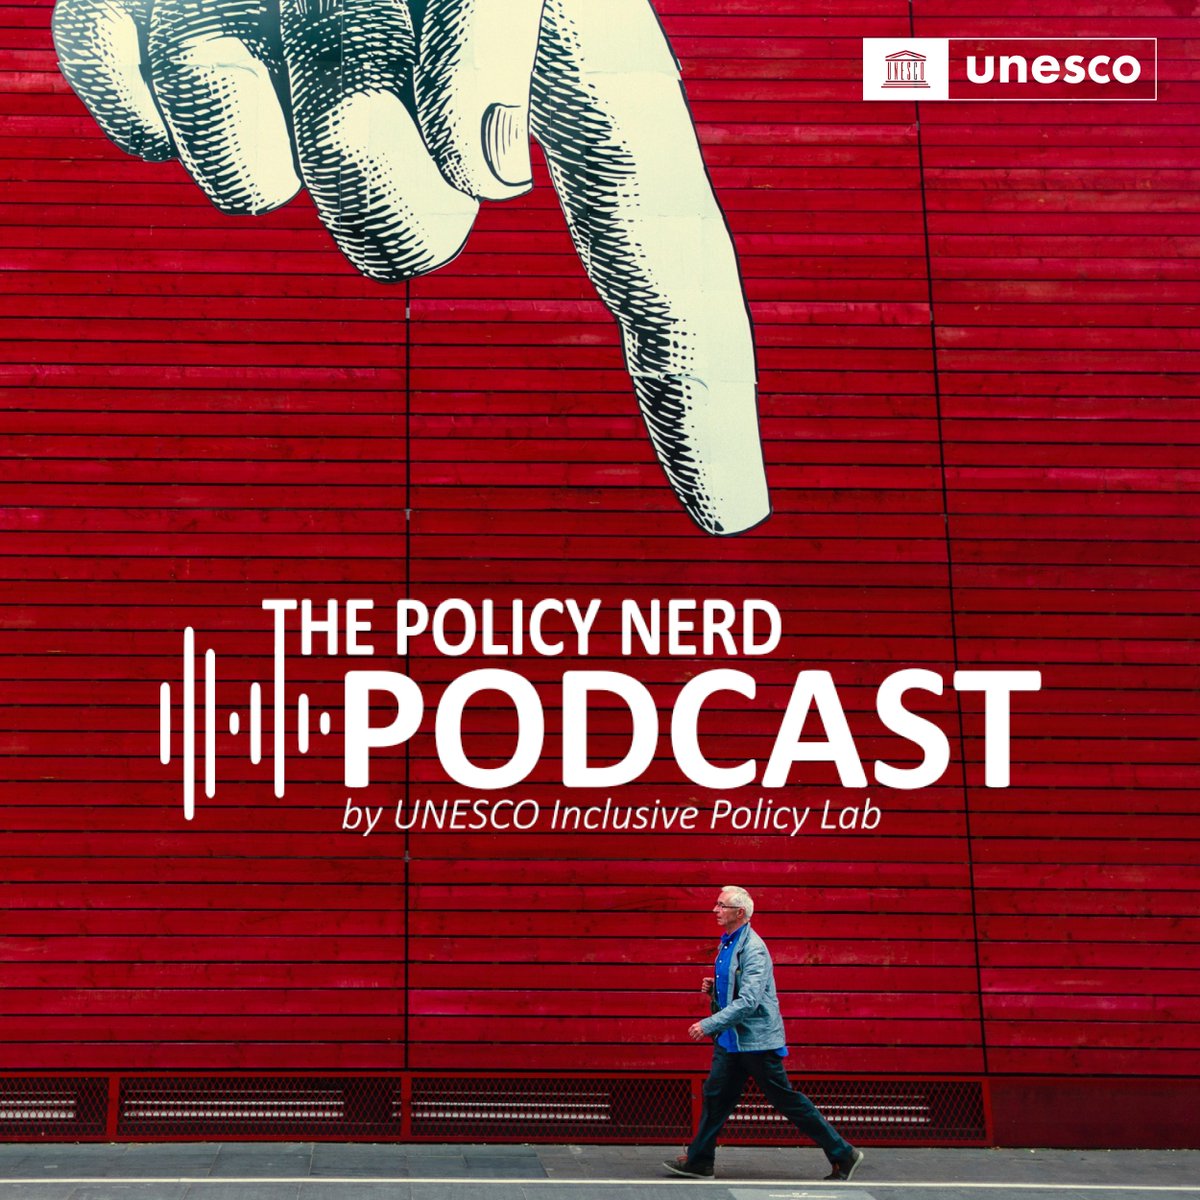 In search of concrete data & policy solutions? Listen to our Policy Nerd #podcast by the @UNESCO Inclusive Policy Lab for insightful discussions with top thinkers such as @rodrikdani, @NadiaCalvino, @manuelmunizv & many more! Find all the episodes here: on.unesco.org/3BrhiiX